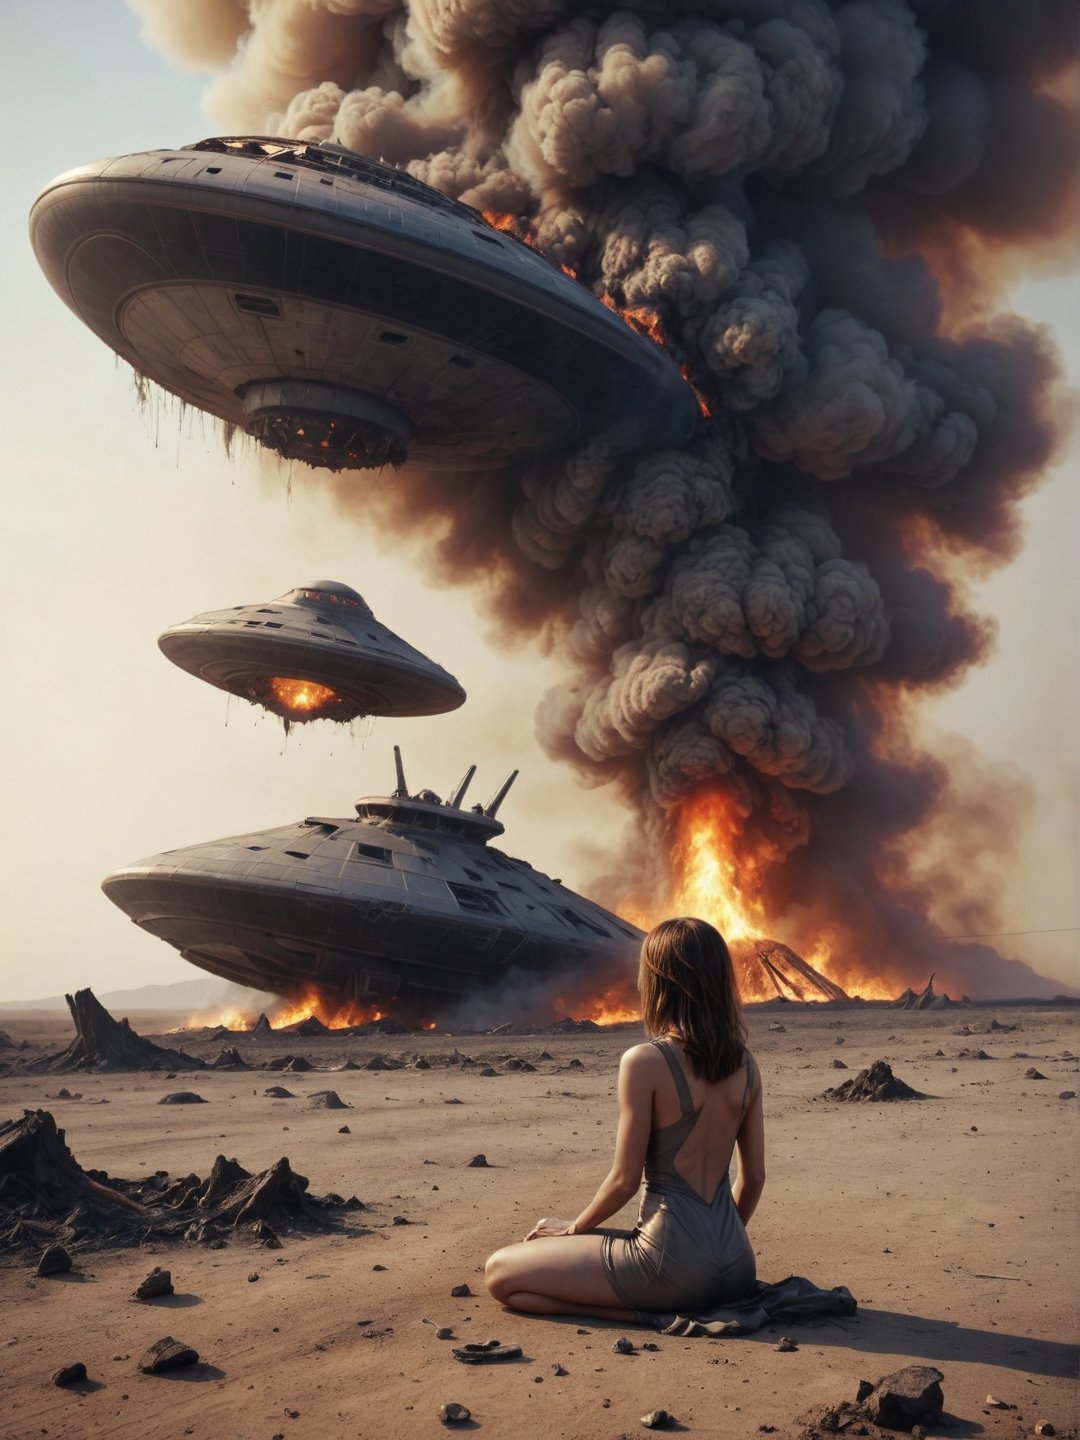 Sad alien in smokes, sitting on a ground, In the distance (An ufo_ship crashed to the ground, debris burning in the smoke), desert,,cinematic_warm_color, add_more_creative,alien_woman